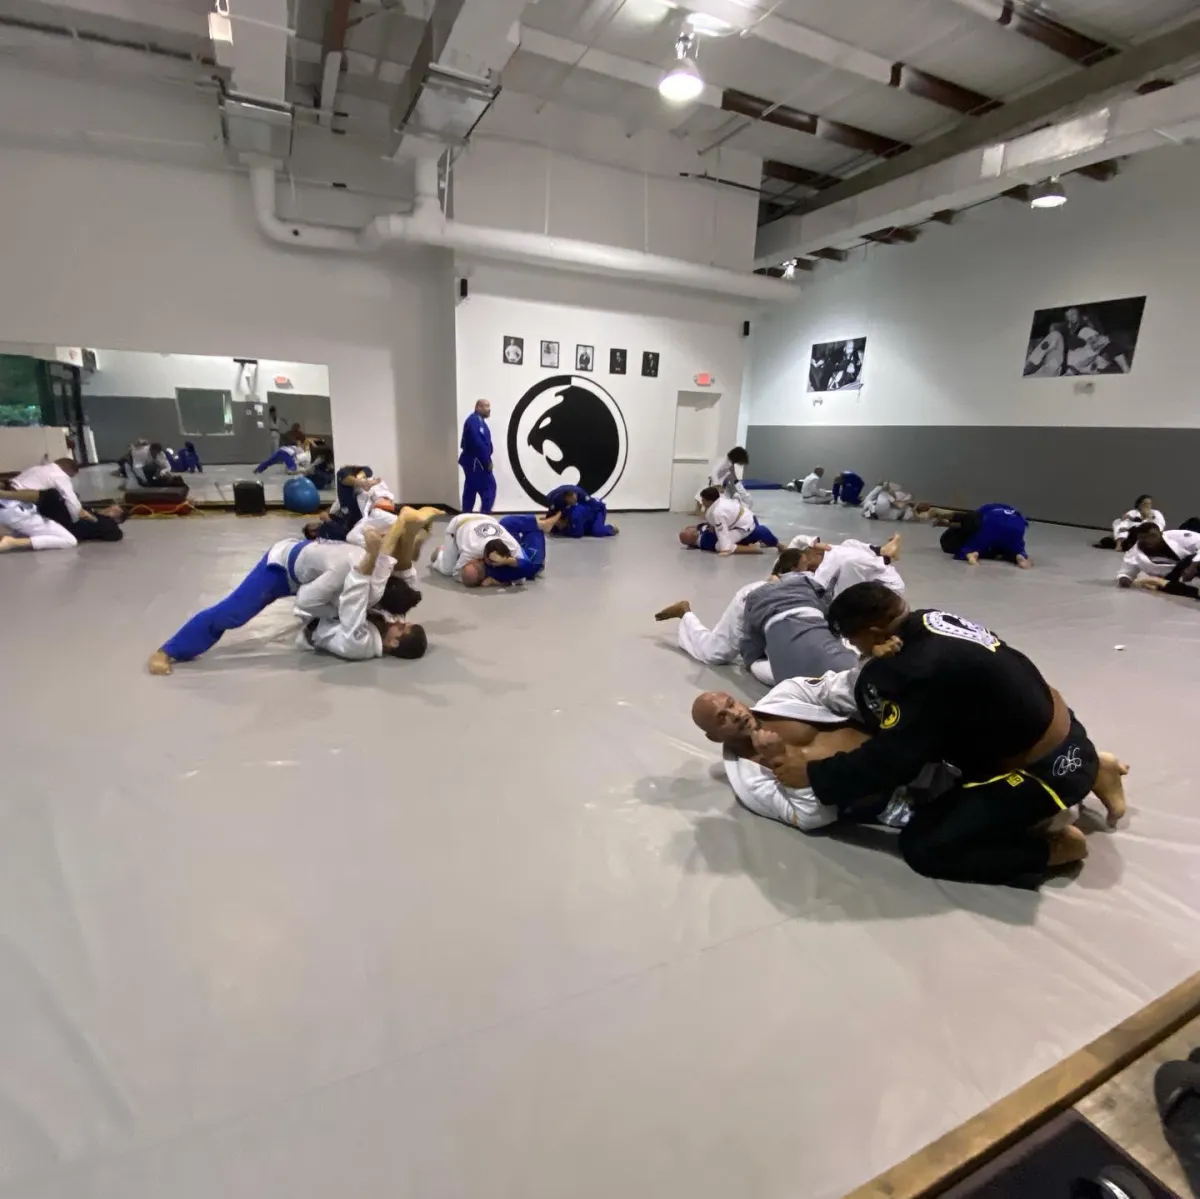 A group of men, dressed in jiu-jitsu uniforms (gi), are gathered in a spacious training room at the Renzo Gracie Jiu-Jitsu Academy of Lake Worth. They are engaged in various physical activities, including grappling, striking, and groundwork techniques. The coach, Santos Caban, is standing in the center of the room, closely observing his students' movements and offering guidance. The walls are adorned with motivational posters and banners featuring the Renzo Gracie Jiu-Jitsu Academy logo. The atmosphere is one of focus, discipline, and camaraderie.